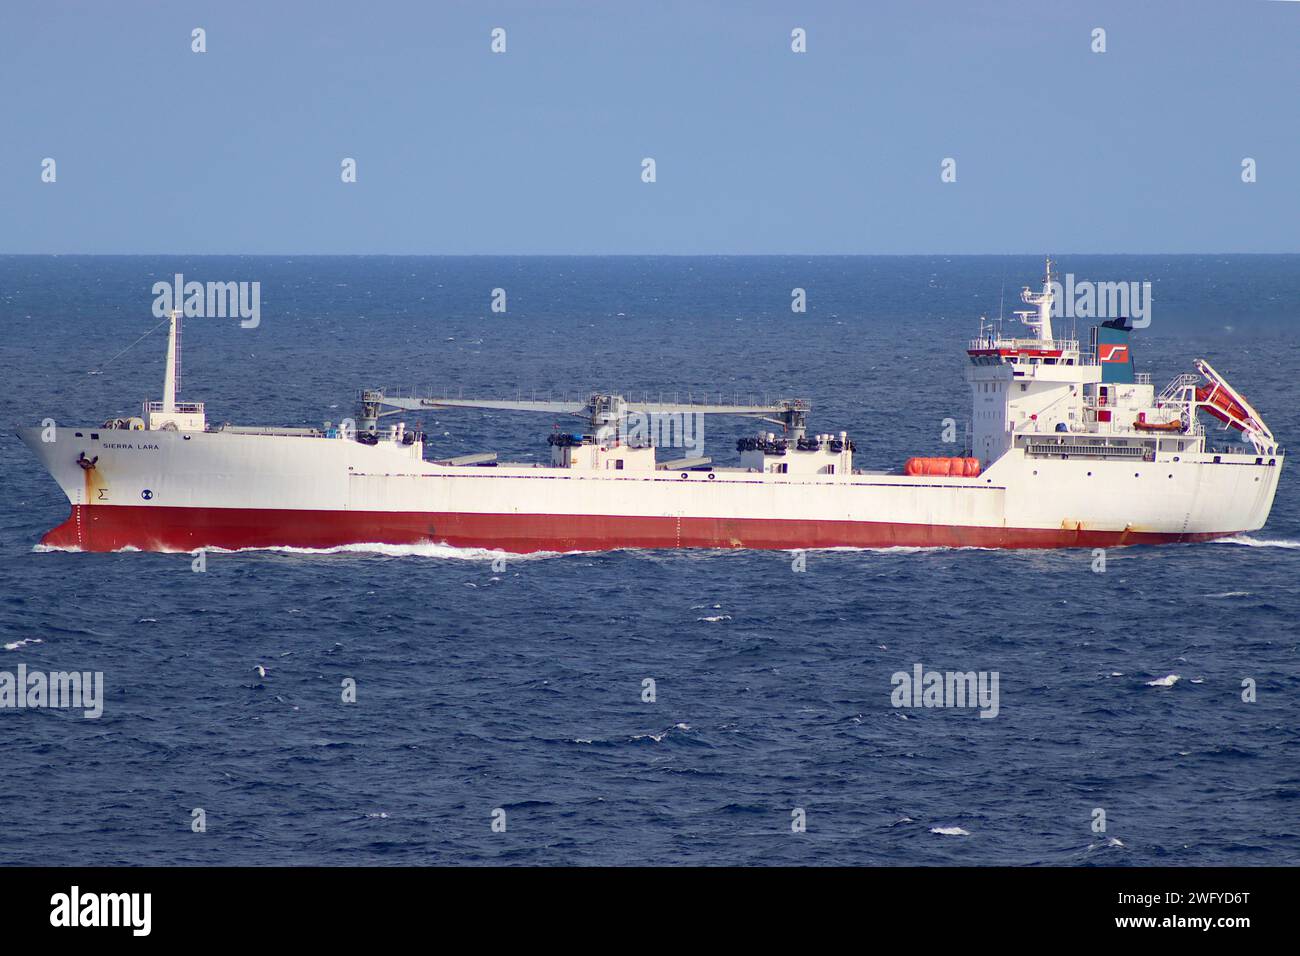 MV Sierra Lara a 5,000 ton “reefer” - a refrigerated cargo ship used to transport perishable goods, sails south off the north French coast. Stock Photo